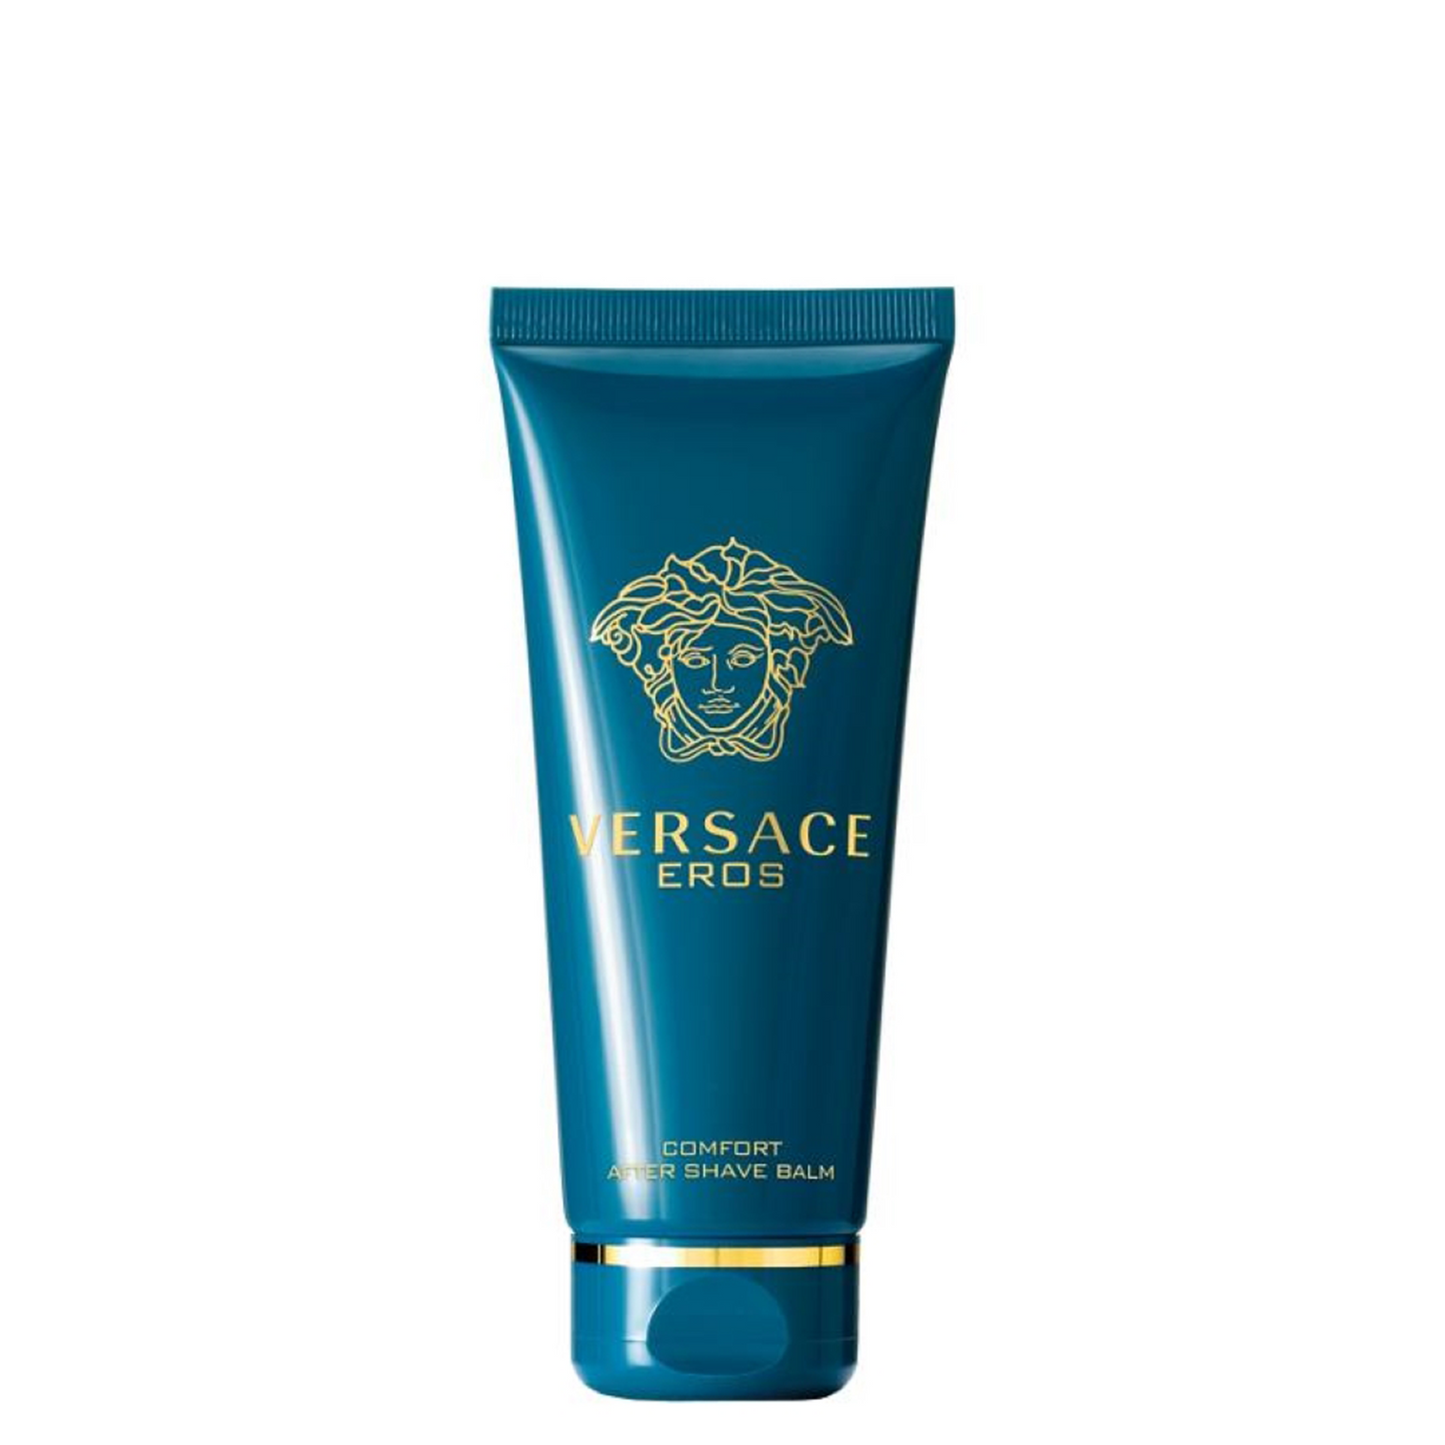 VERSACE EROS AFTER SHAVE BALM